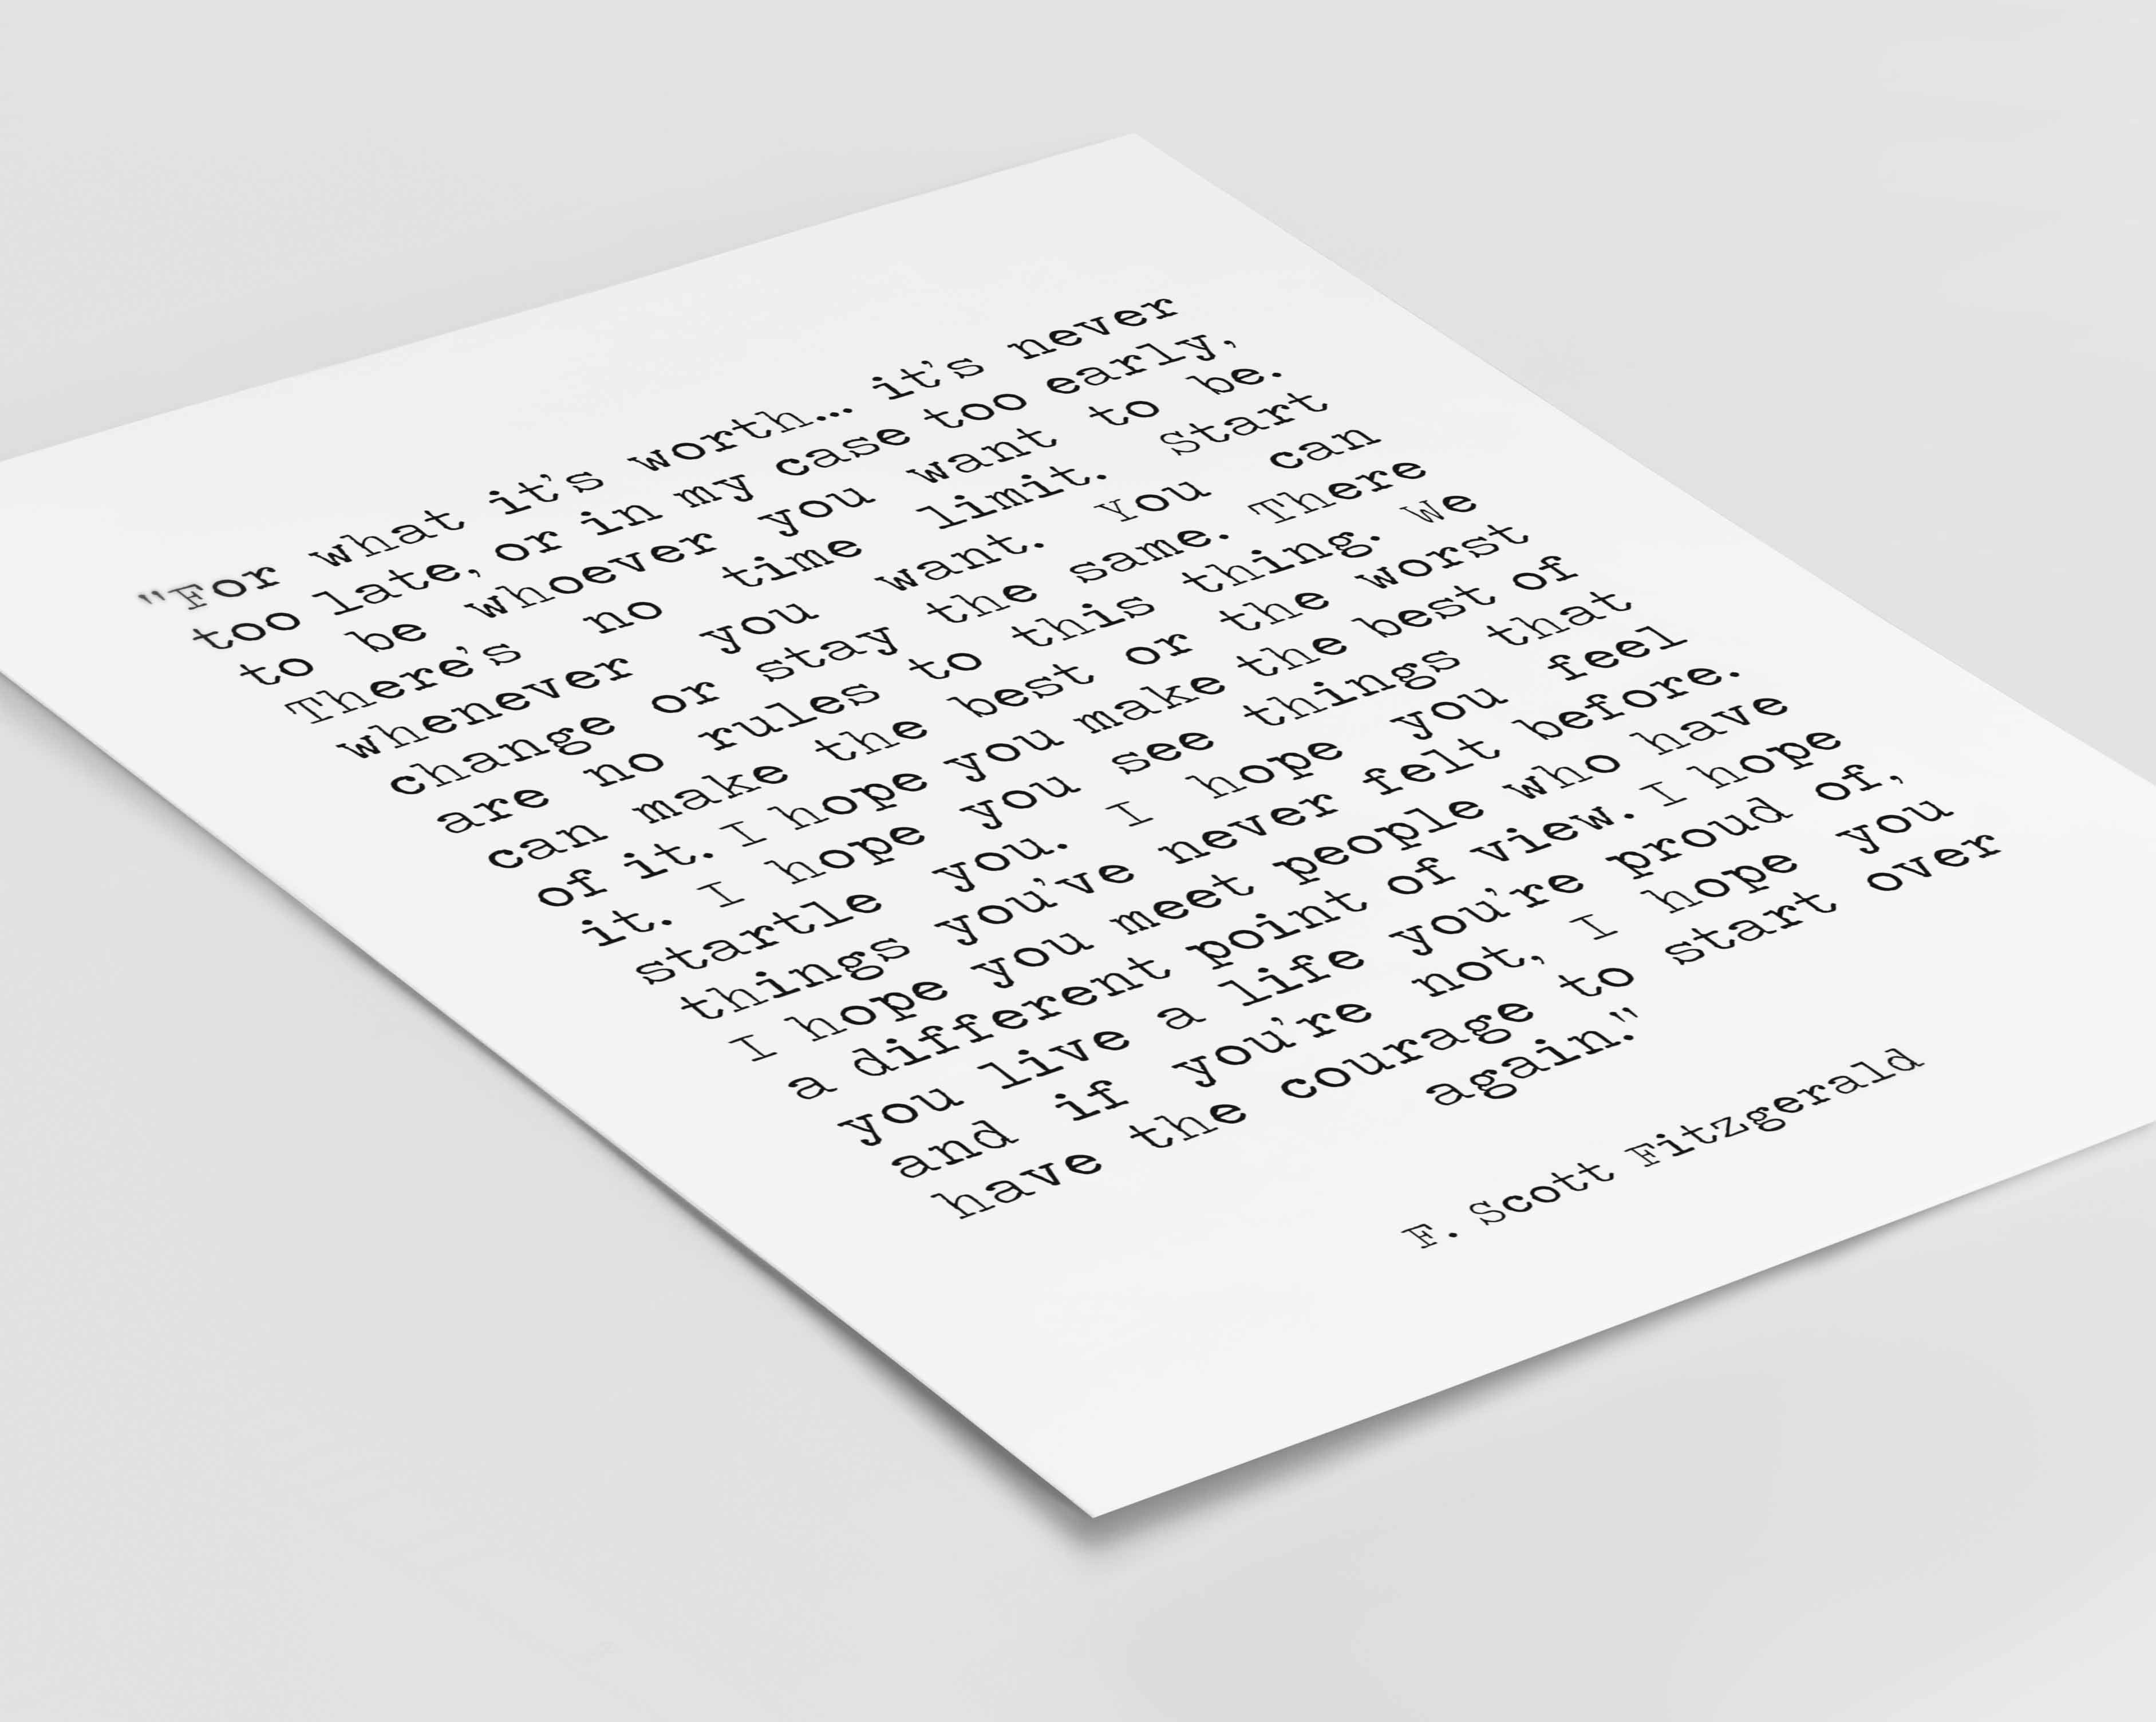 F Scott Fitzgerald For What It's Worth Quote Print